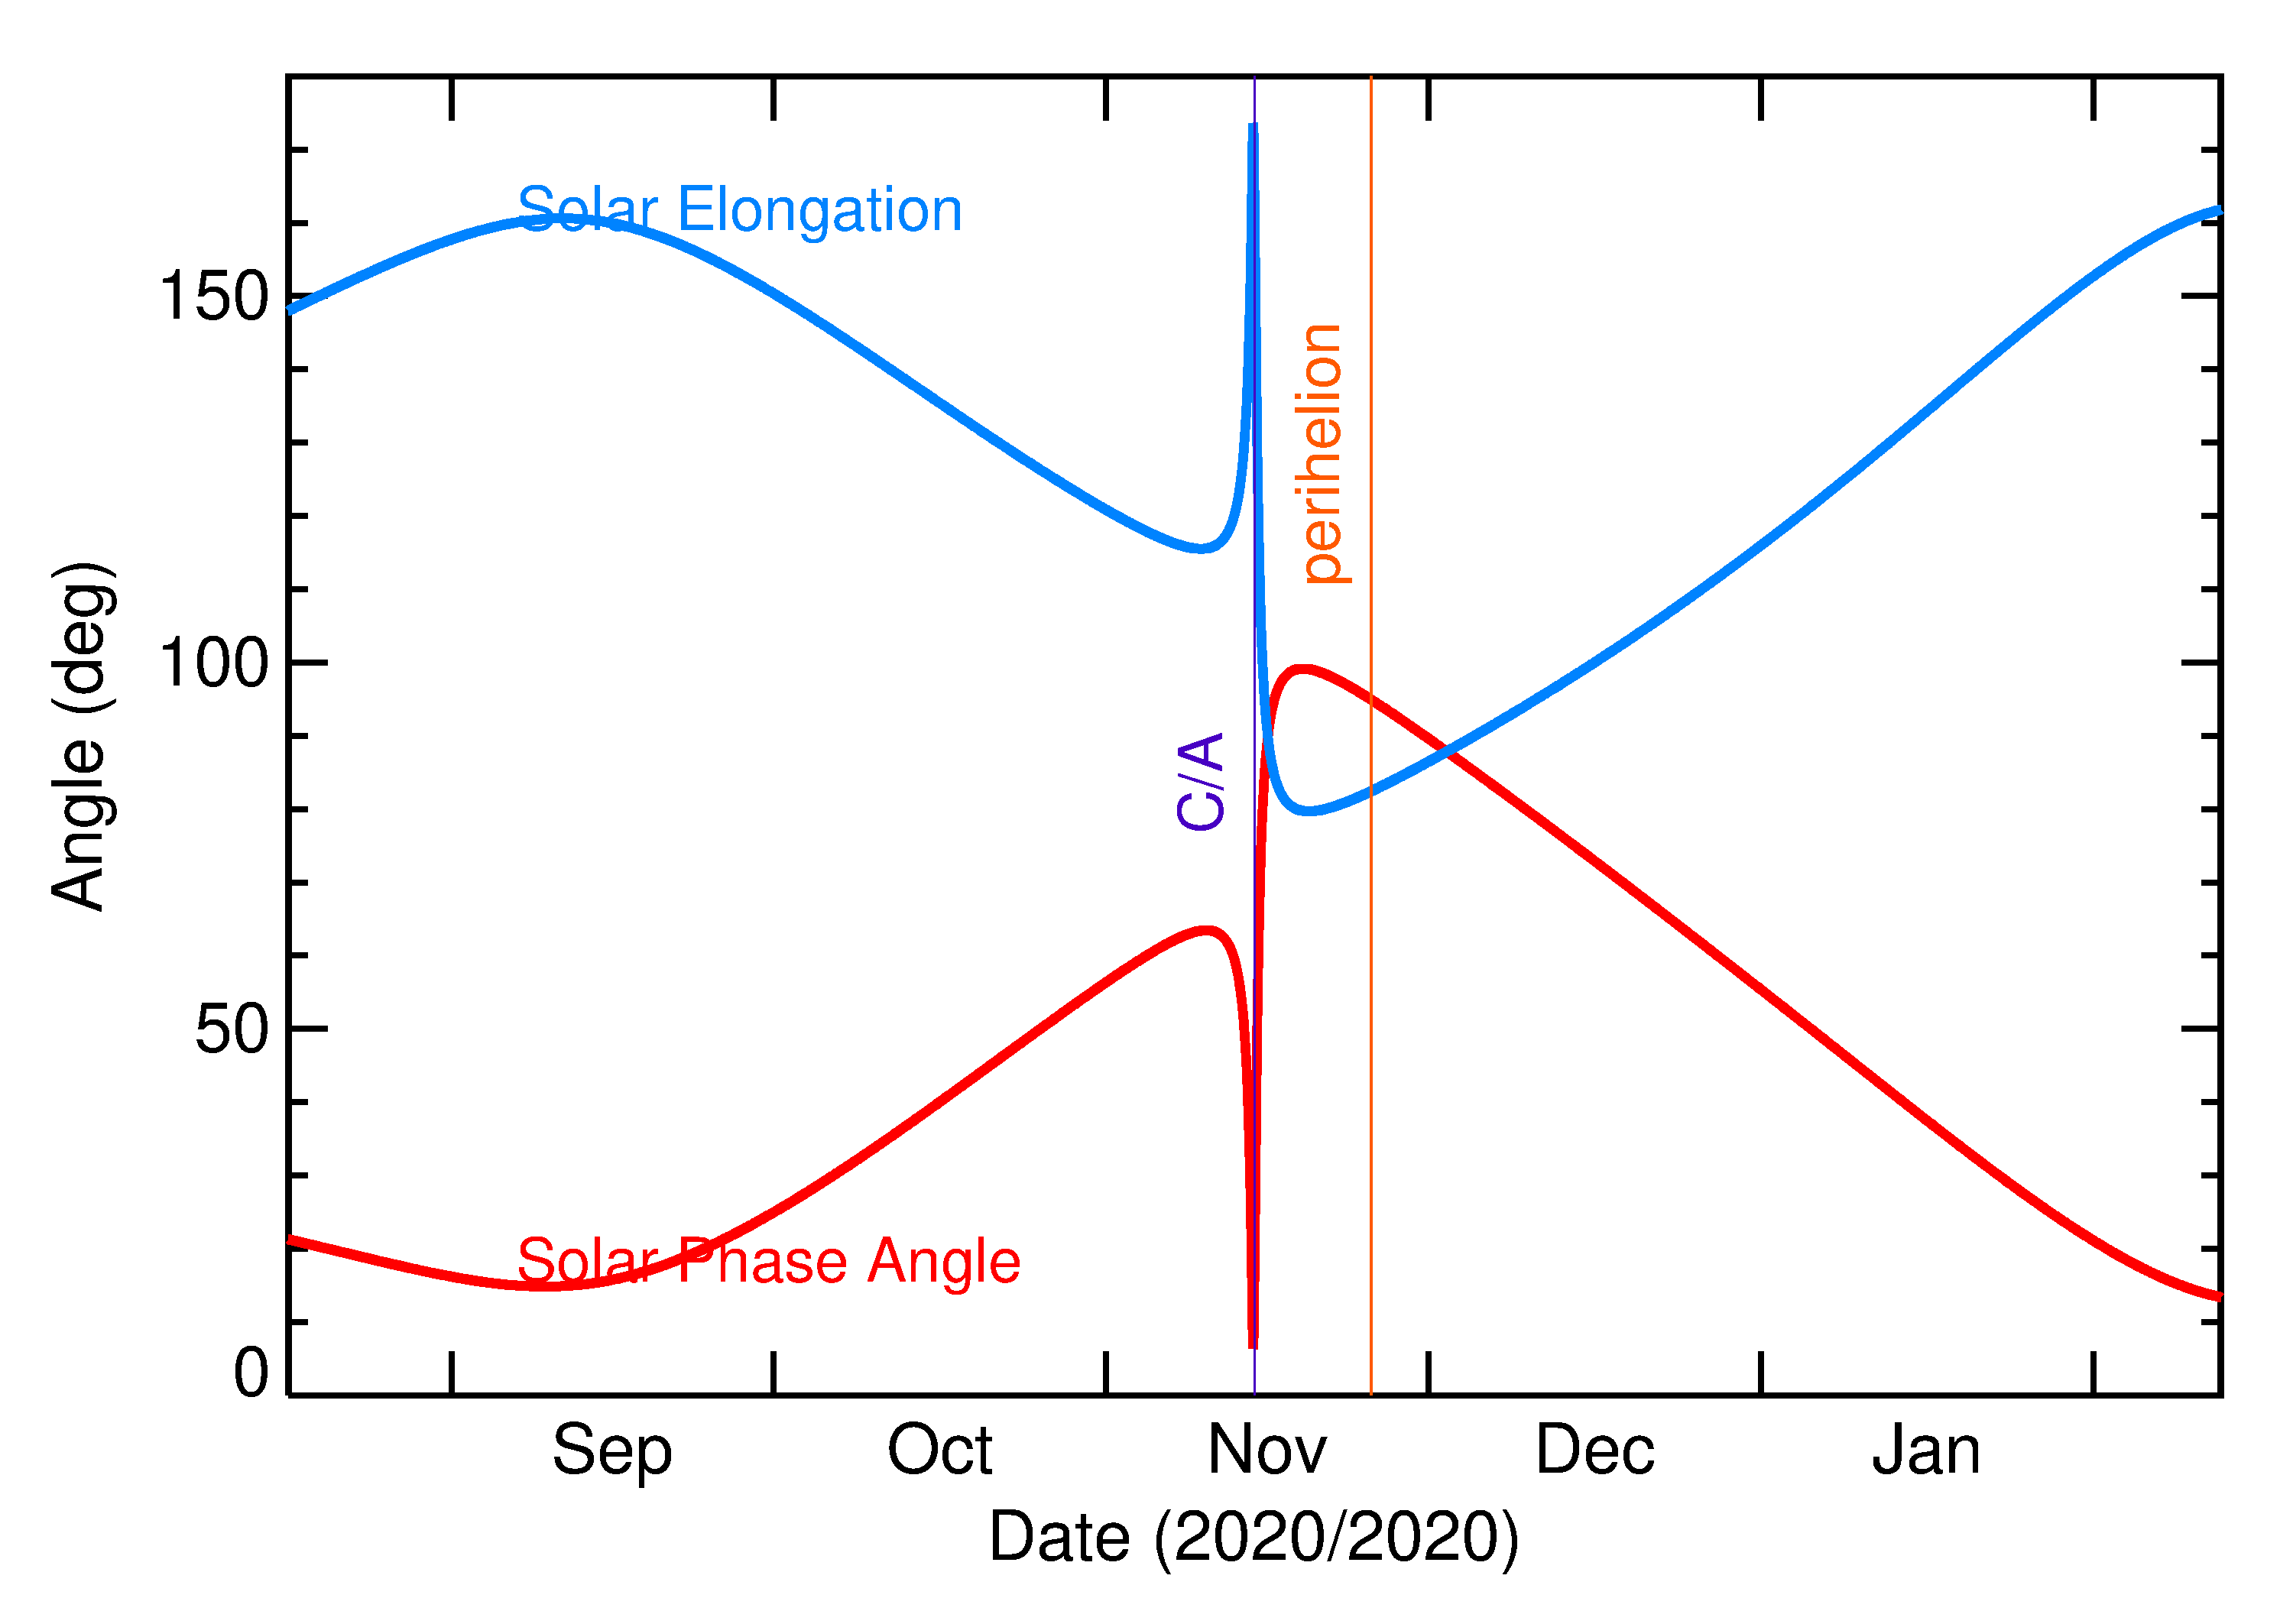 Solar Elongation and Solar Phase Angle of 2020 VH5 in the months around closest approach